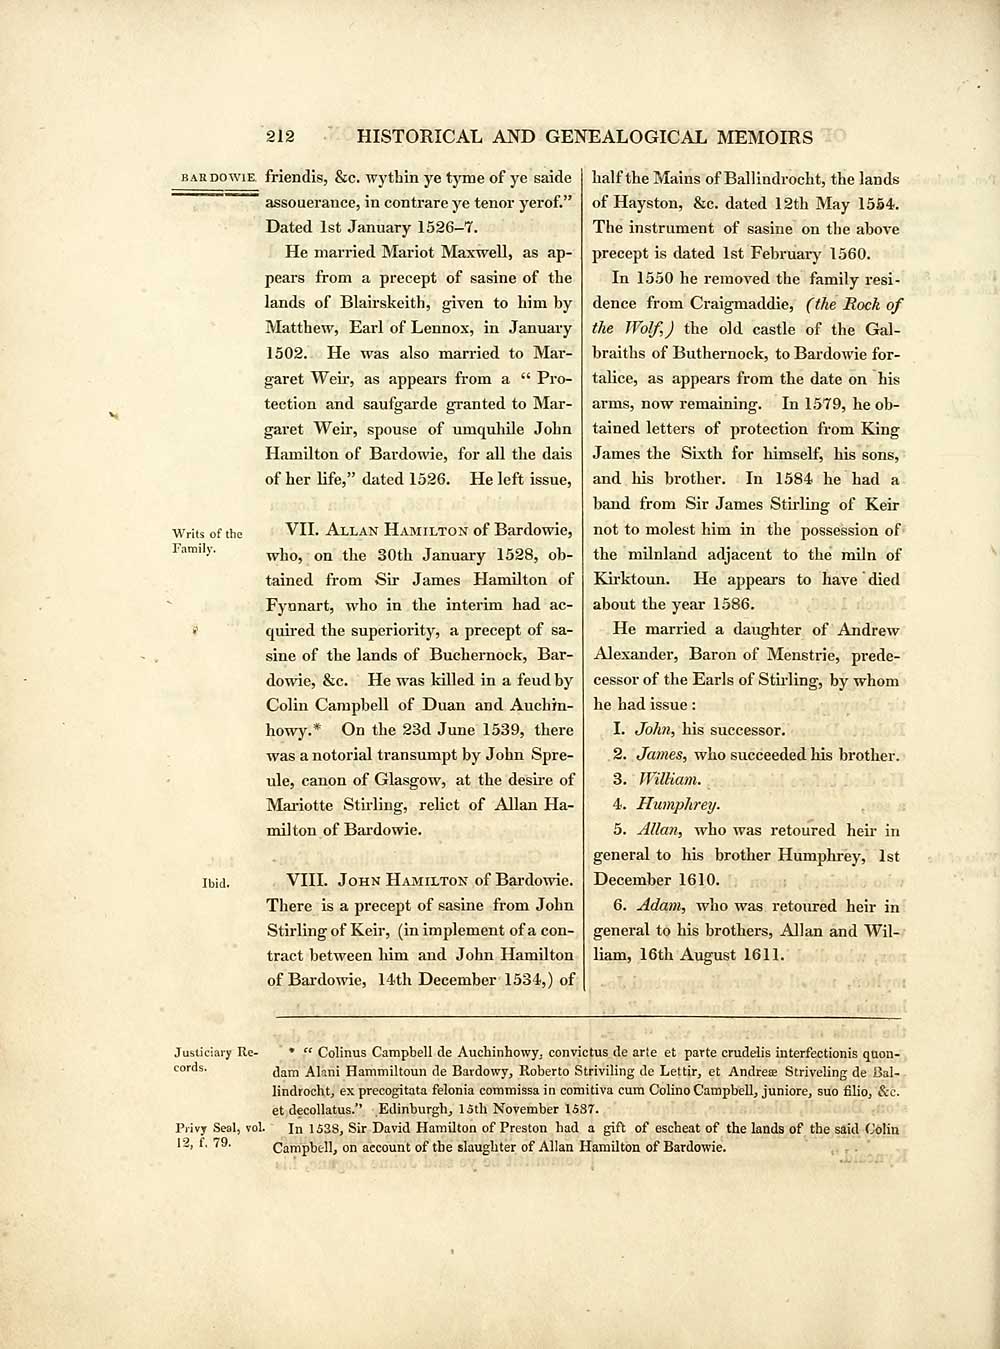 (222) Page 212 - Historical and genealogical memoirs of the House of ...